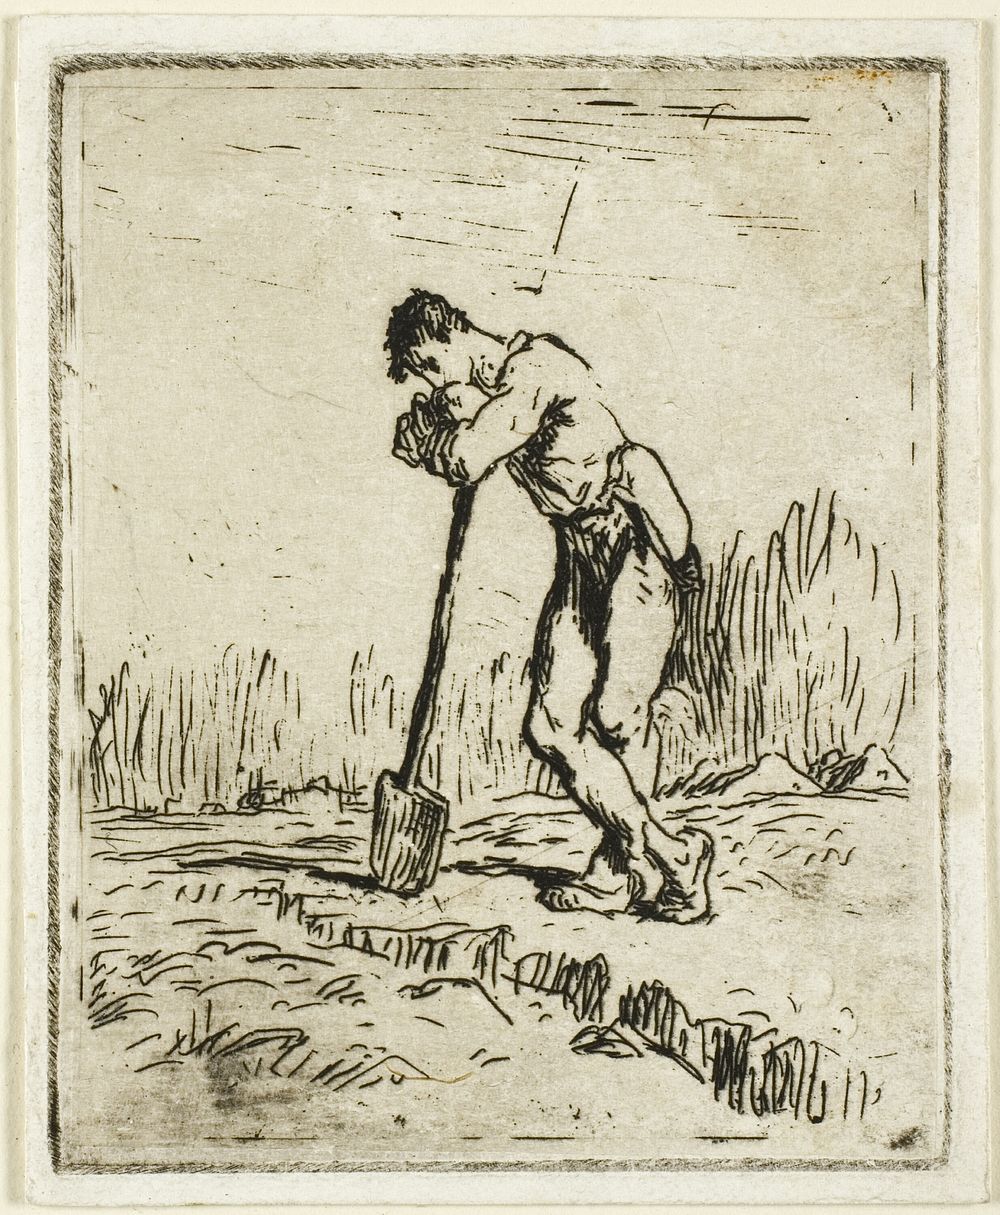 The Man Leaning on His Spade by Jean François Millet